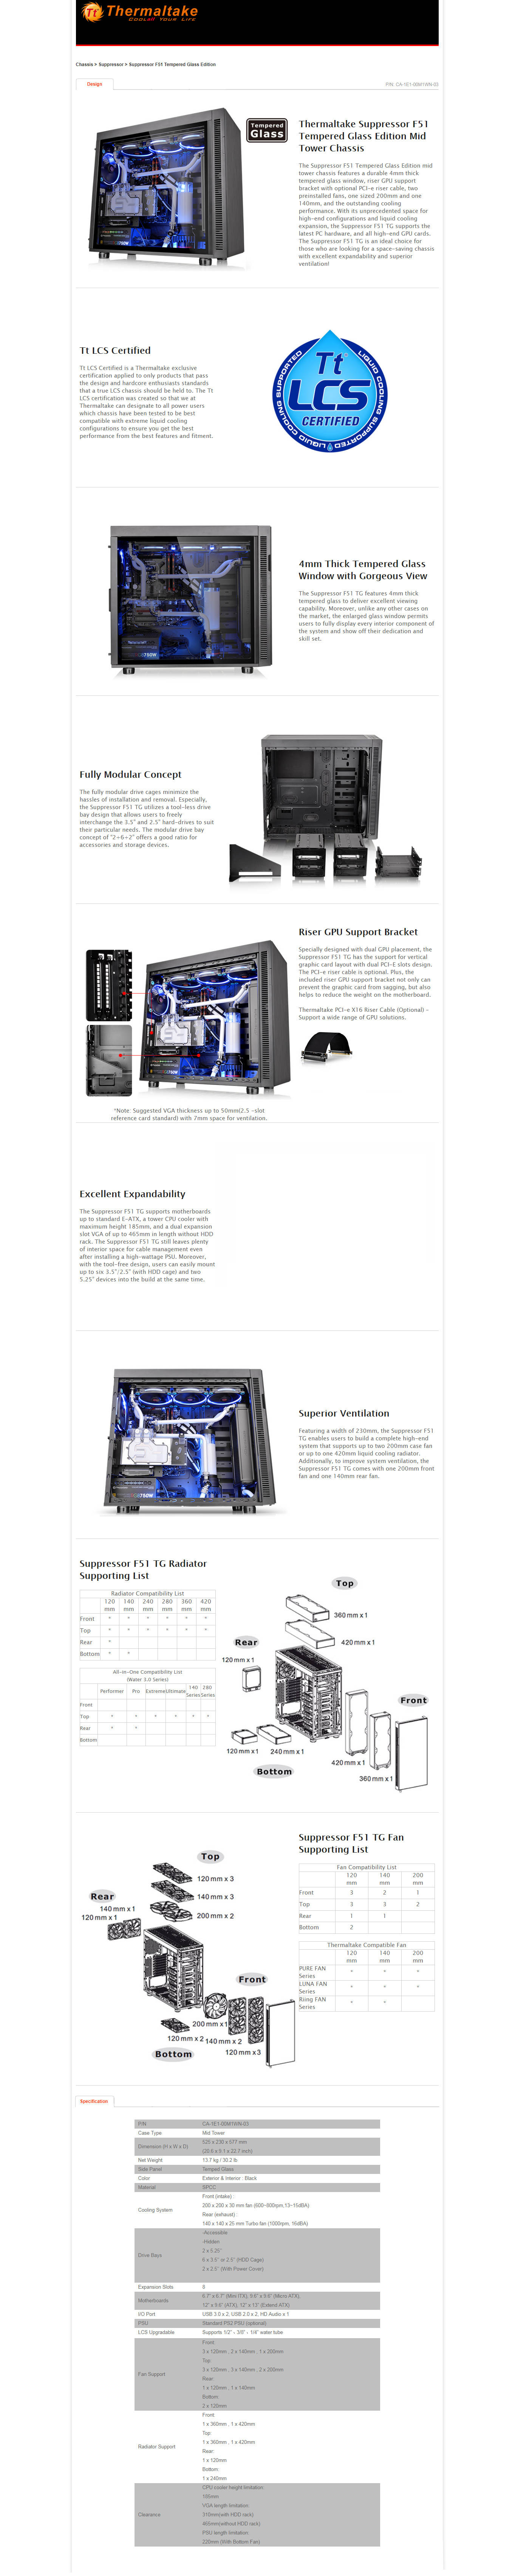  Buy Online Thermaltake Suppressor F51 Tempered Glass Edition Mid Tower Chassis (CA-1E1-00M1WN-03)